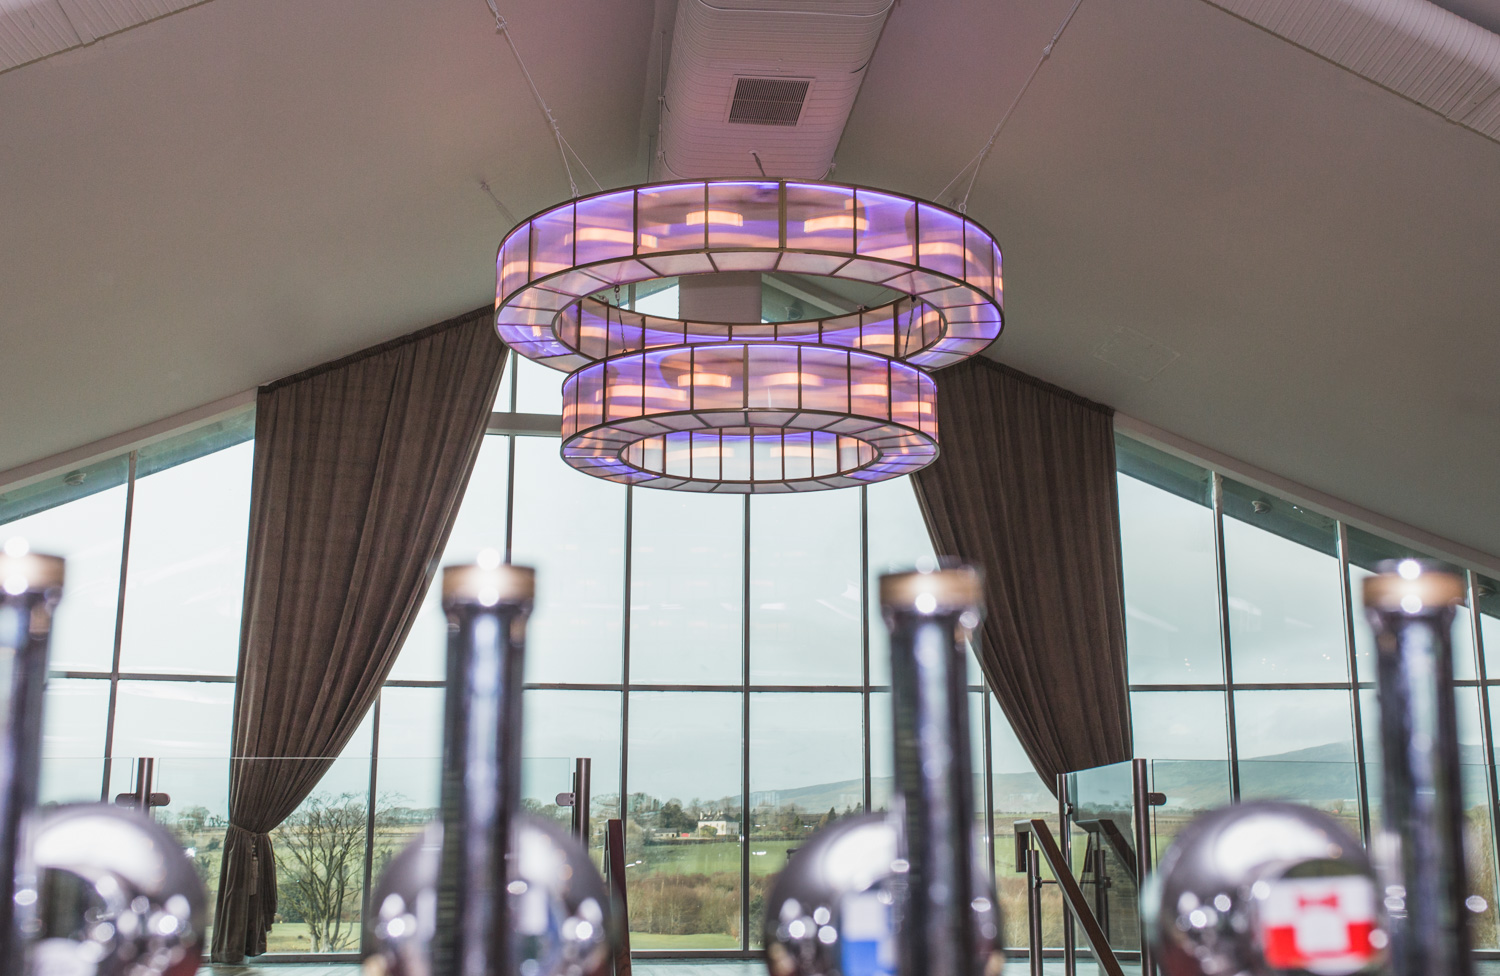 We manufactured this 3-metre double ring chandelier for the Foyle Golf Centre